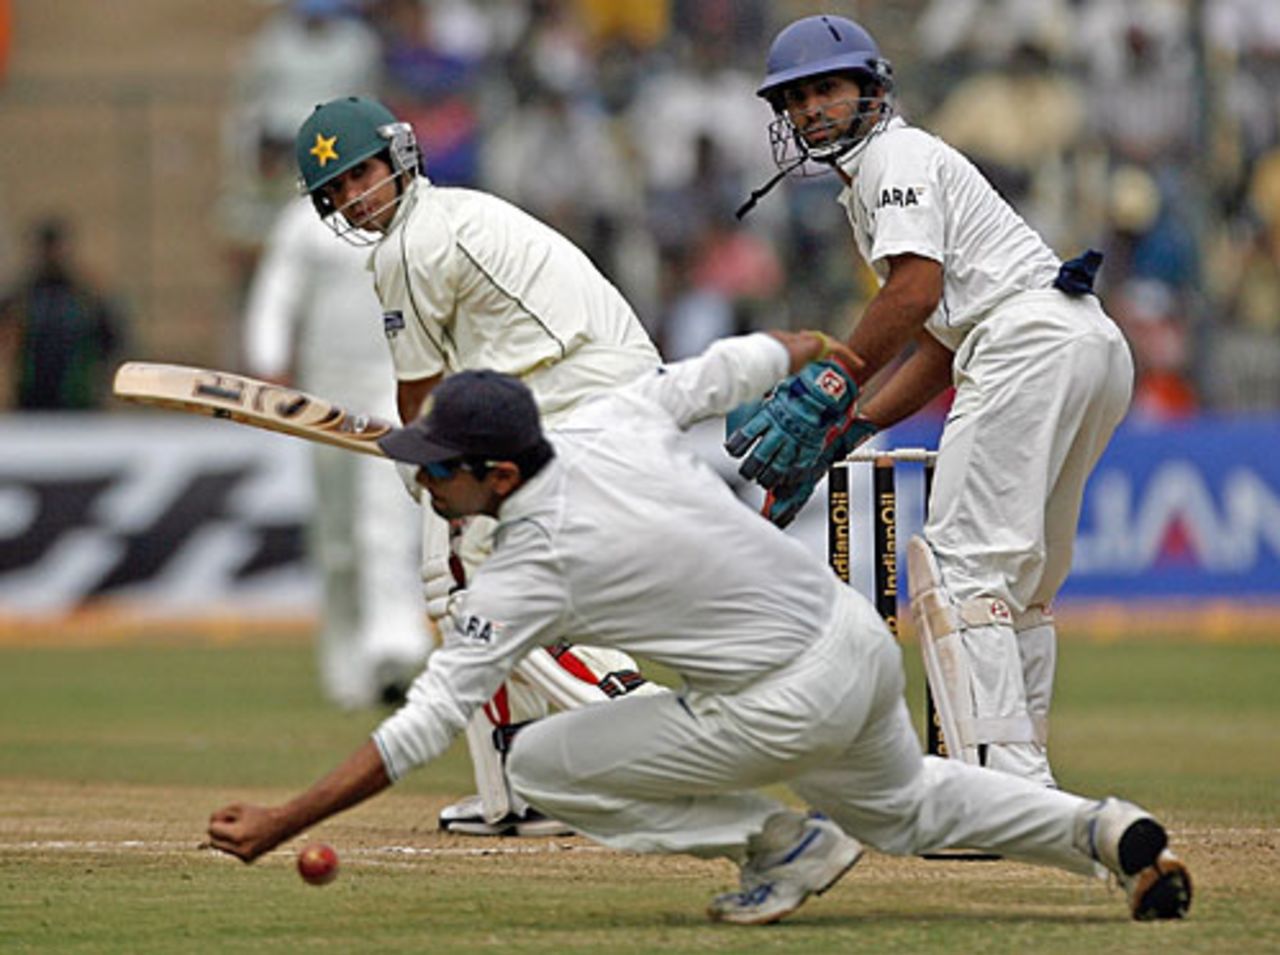 Rahul Dravid fails to hold on to an edge off Salman Butt's bat, India v Pakistan, 3rd Test, Bangalore, 5th day, December 12, 2007 

